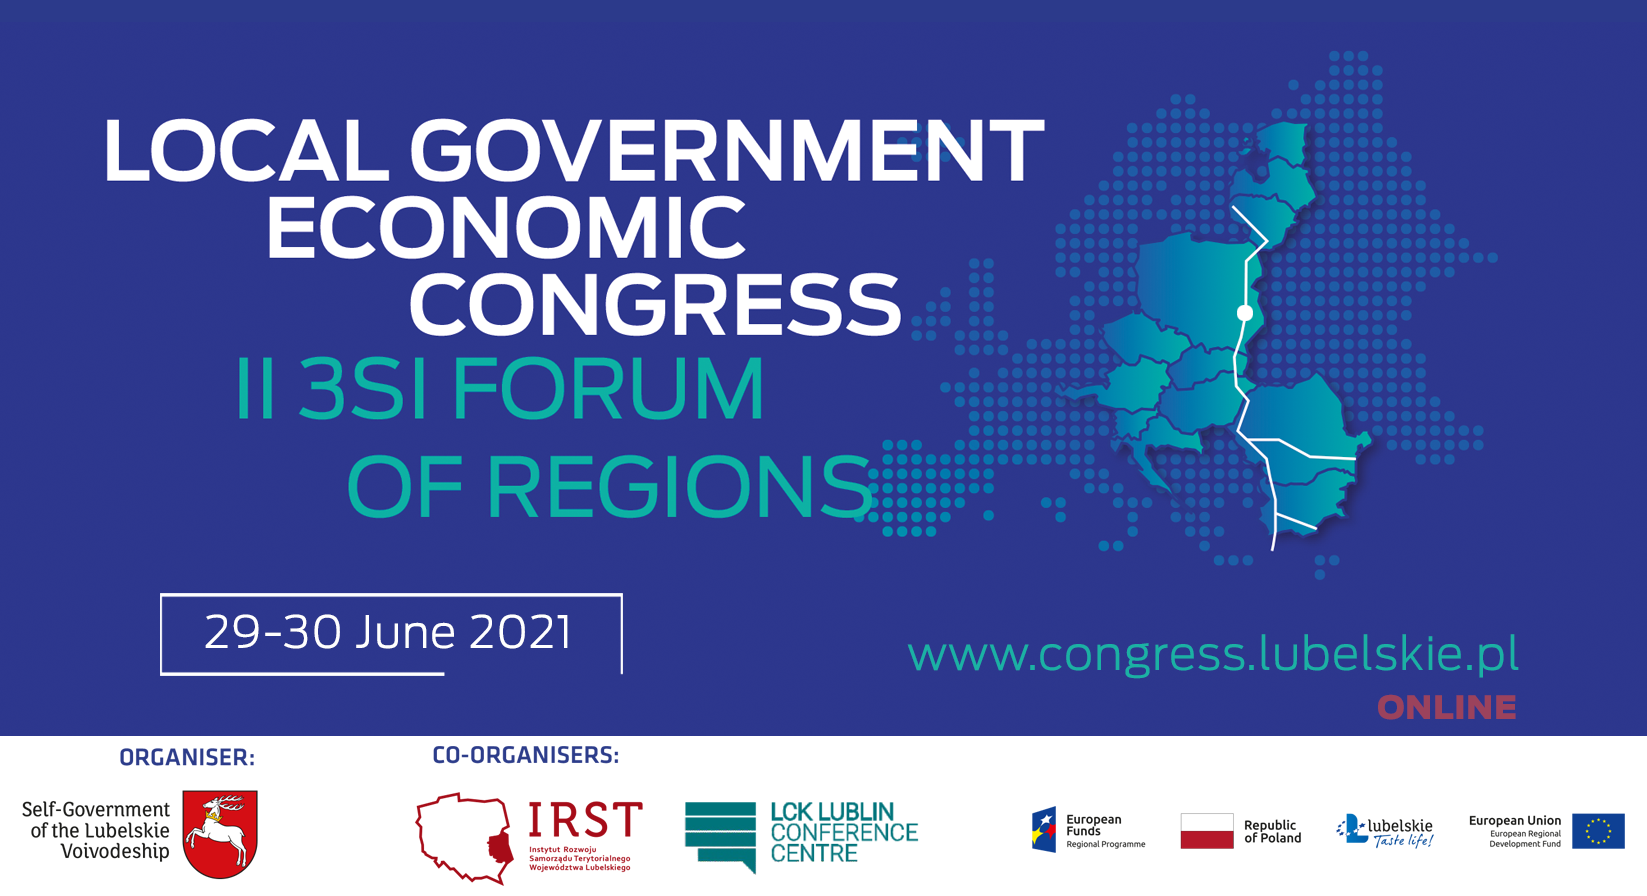 NEW DATE 29-30 June 2021 of the Local Government Economic Congress II and Three Seas Initiative Forum of Regions